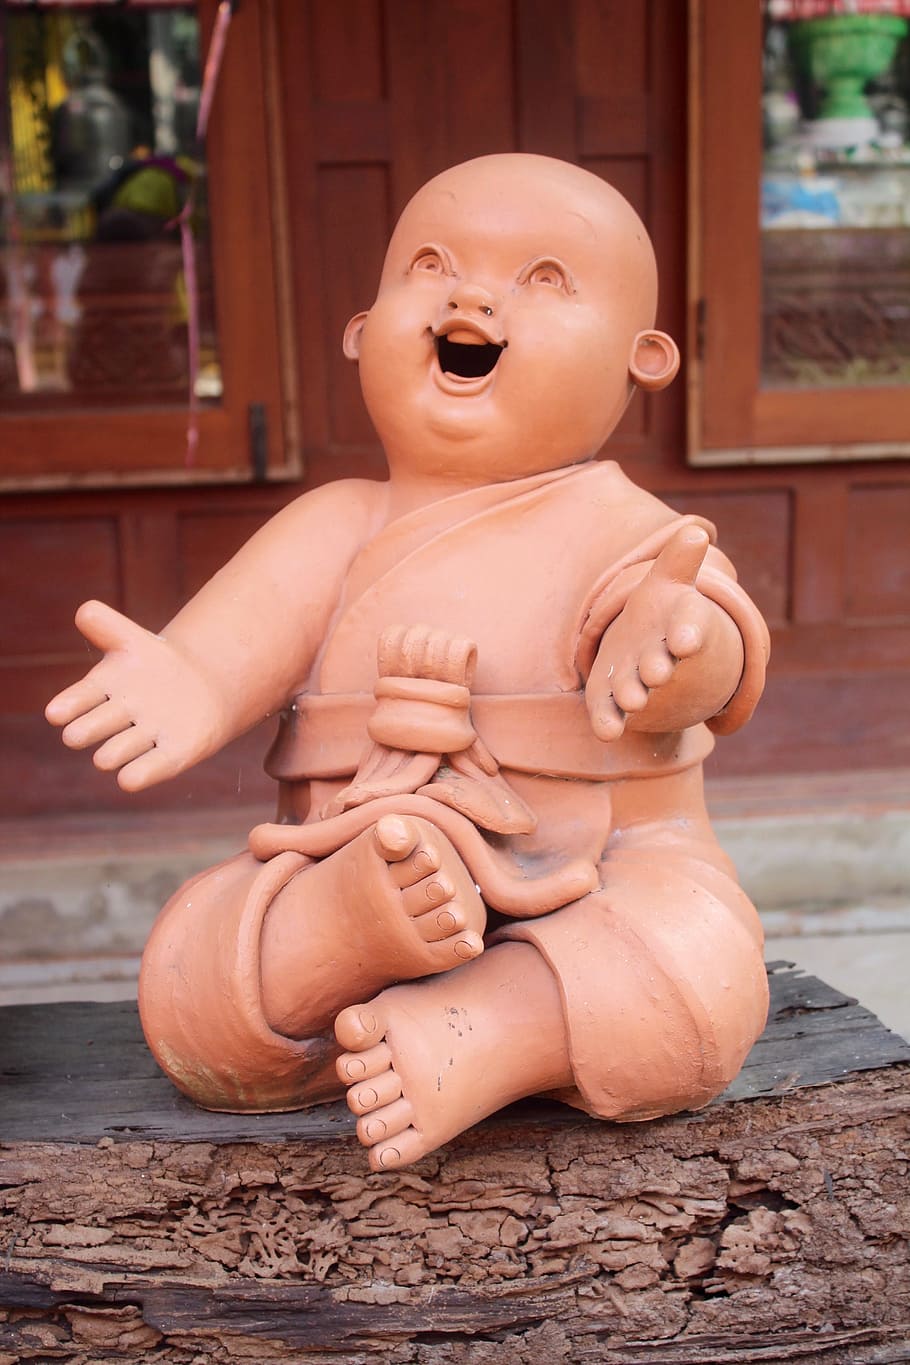 baby doll laughing, buddha, figures, stone figure, sculpture, statue, buddhism, yoga, funny, glasses